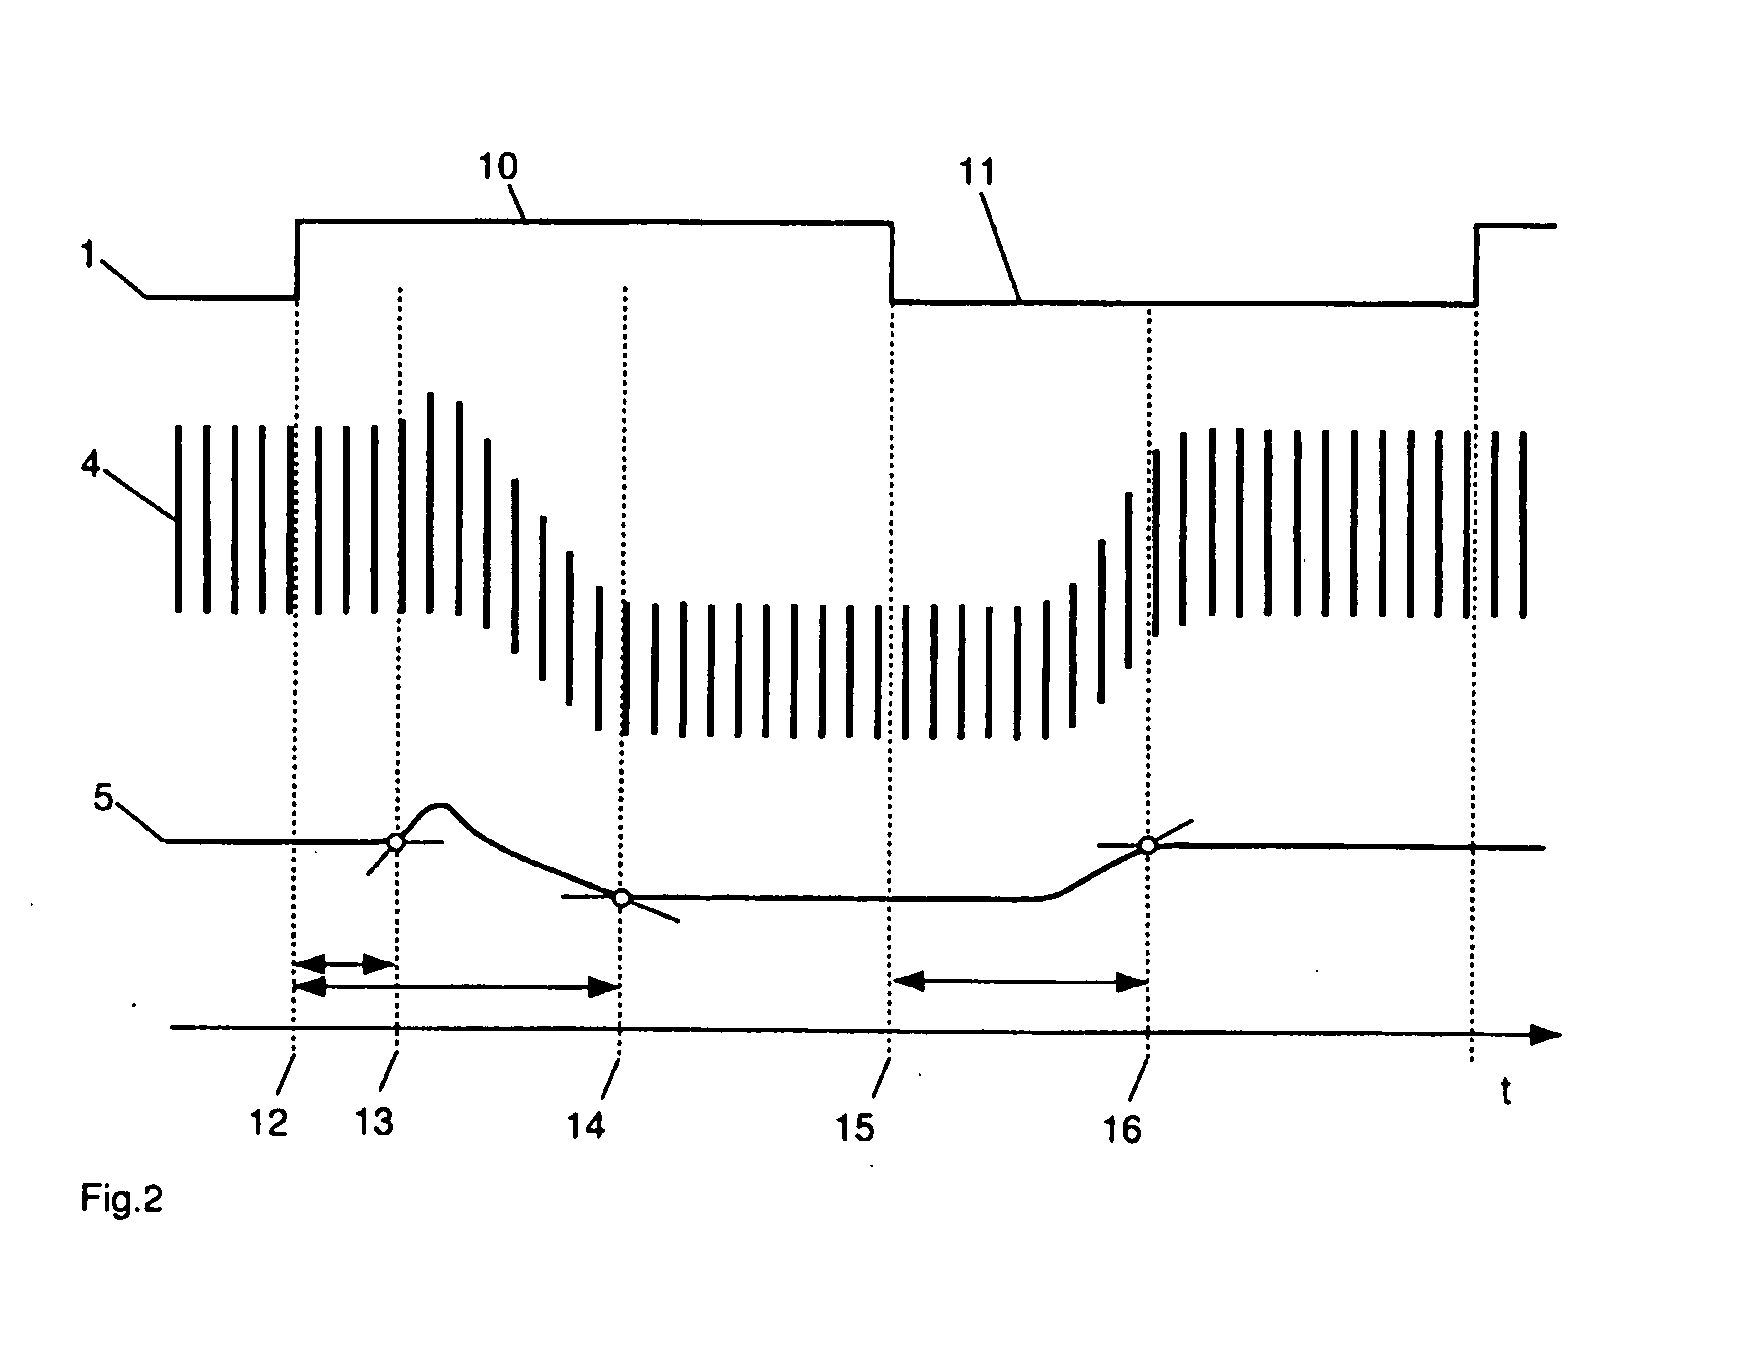 Apparatus and computer program for determining a patient's volemic status represented by cardiopulmonary blood volume